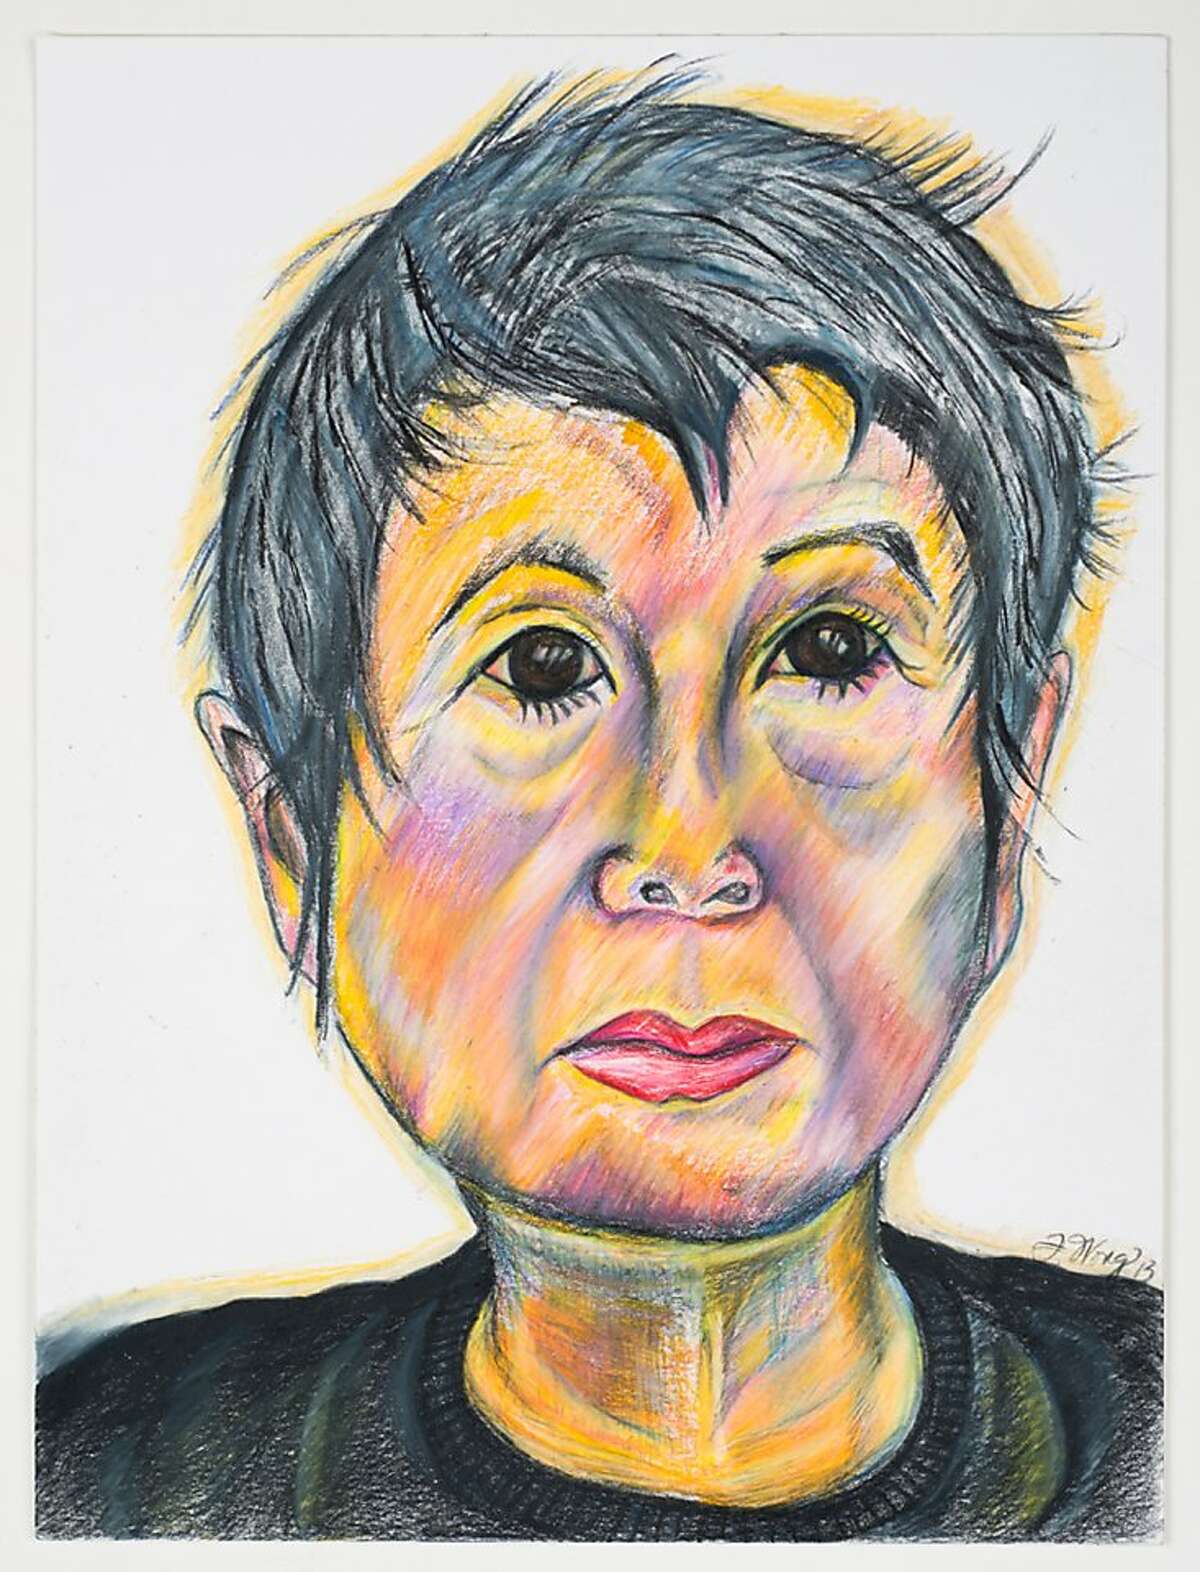 Flo Oy Wong's Self-portrait, 2013, 9" x 12", colored pencils and conte crayon on paper